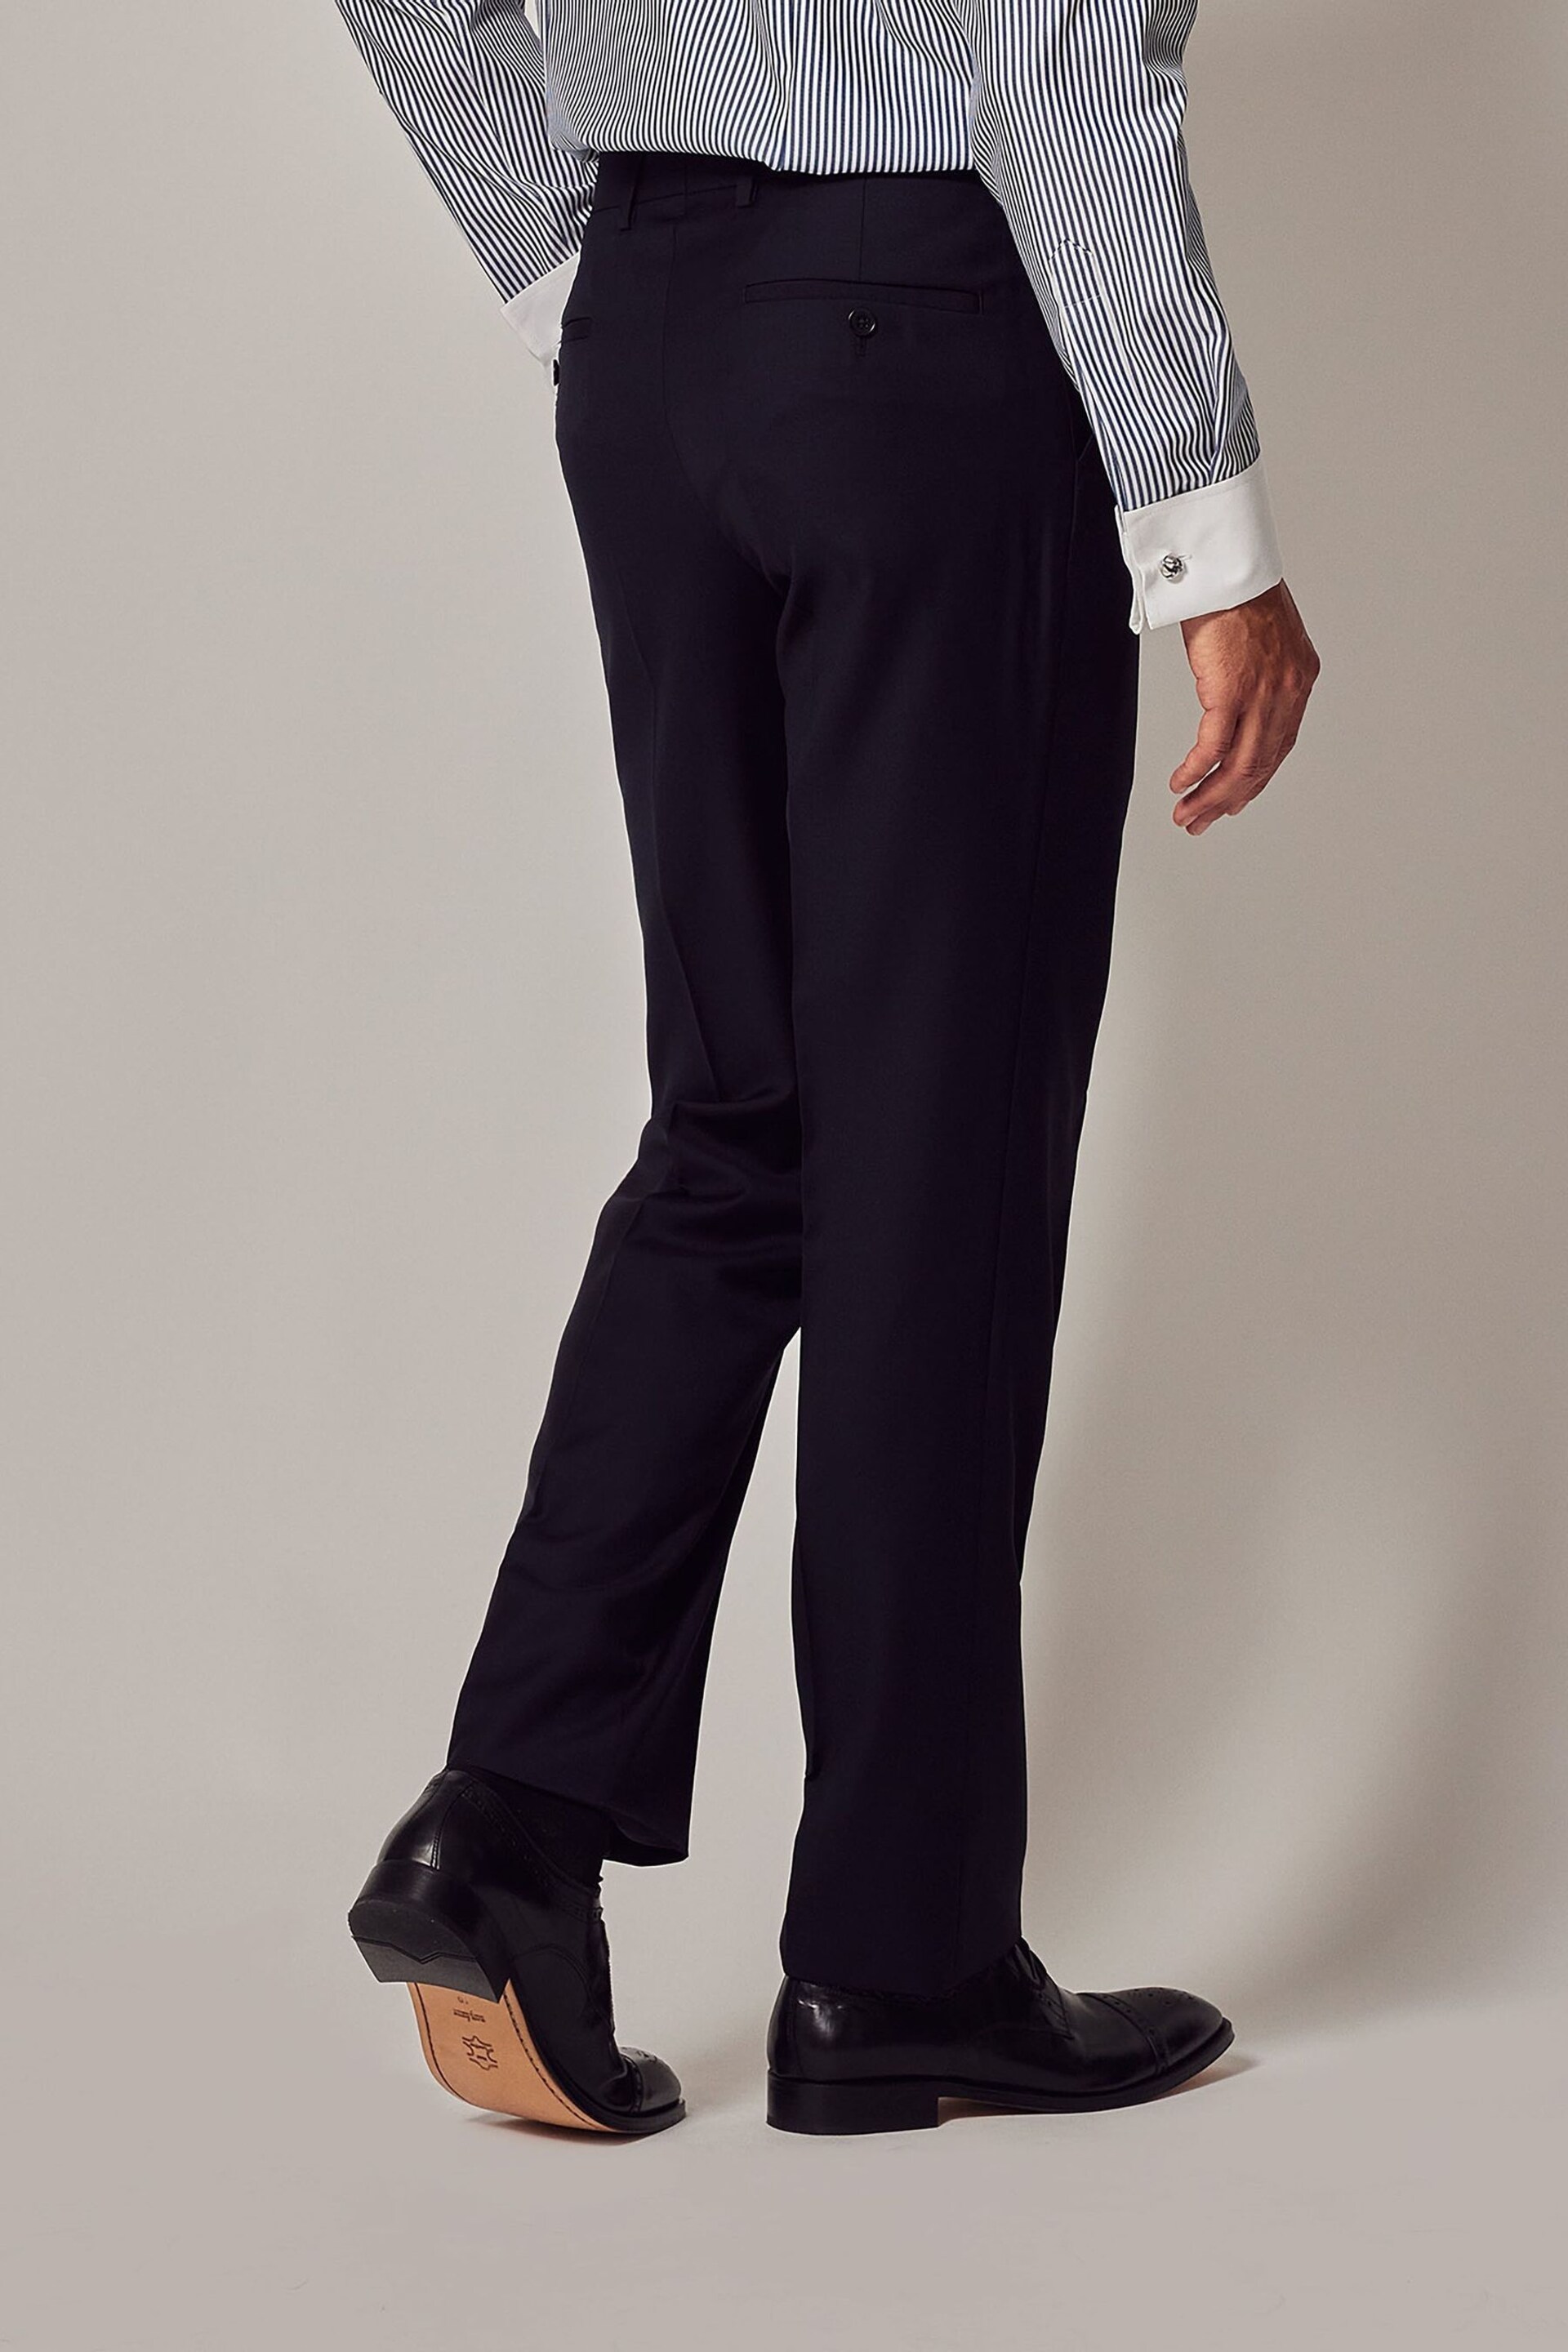 Hawes & Curtis Slim Blue Twill Suit Trousers - Image 4 of 4